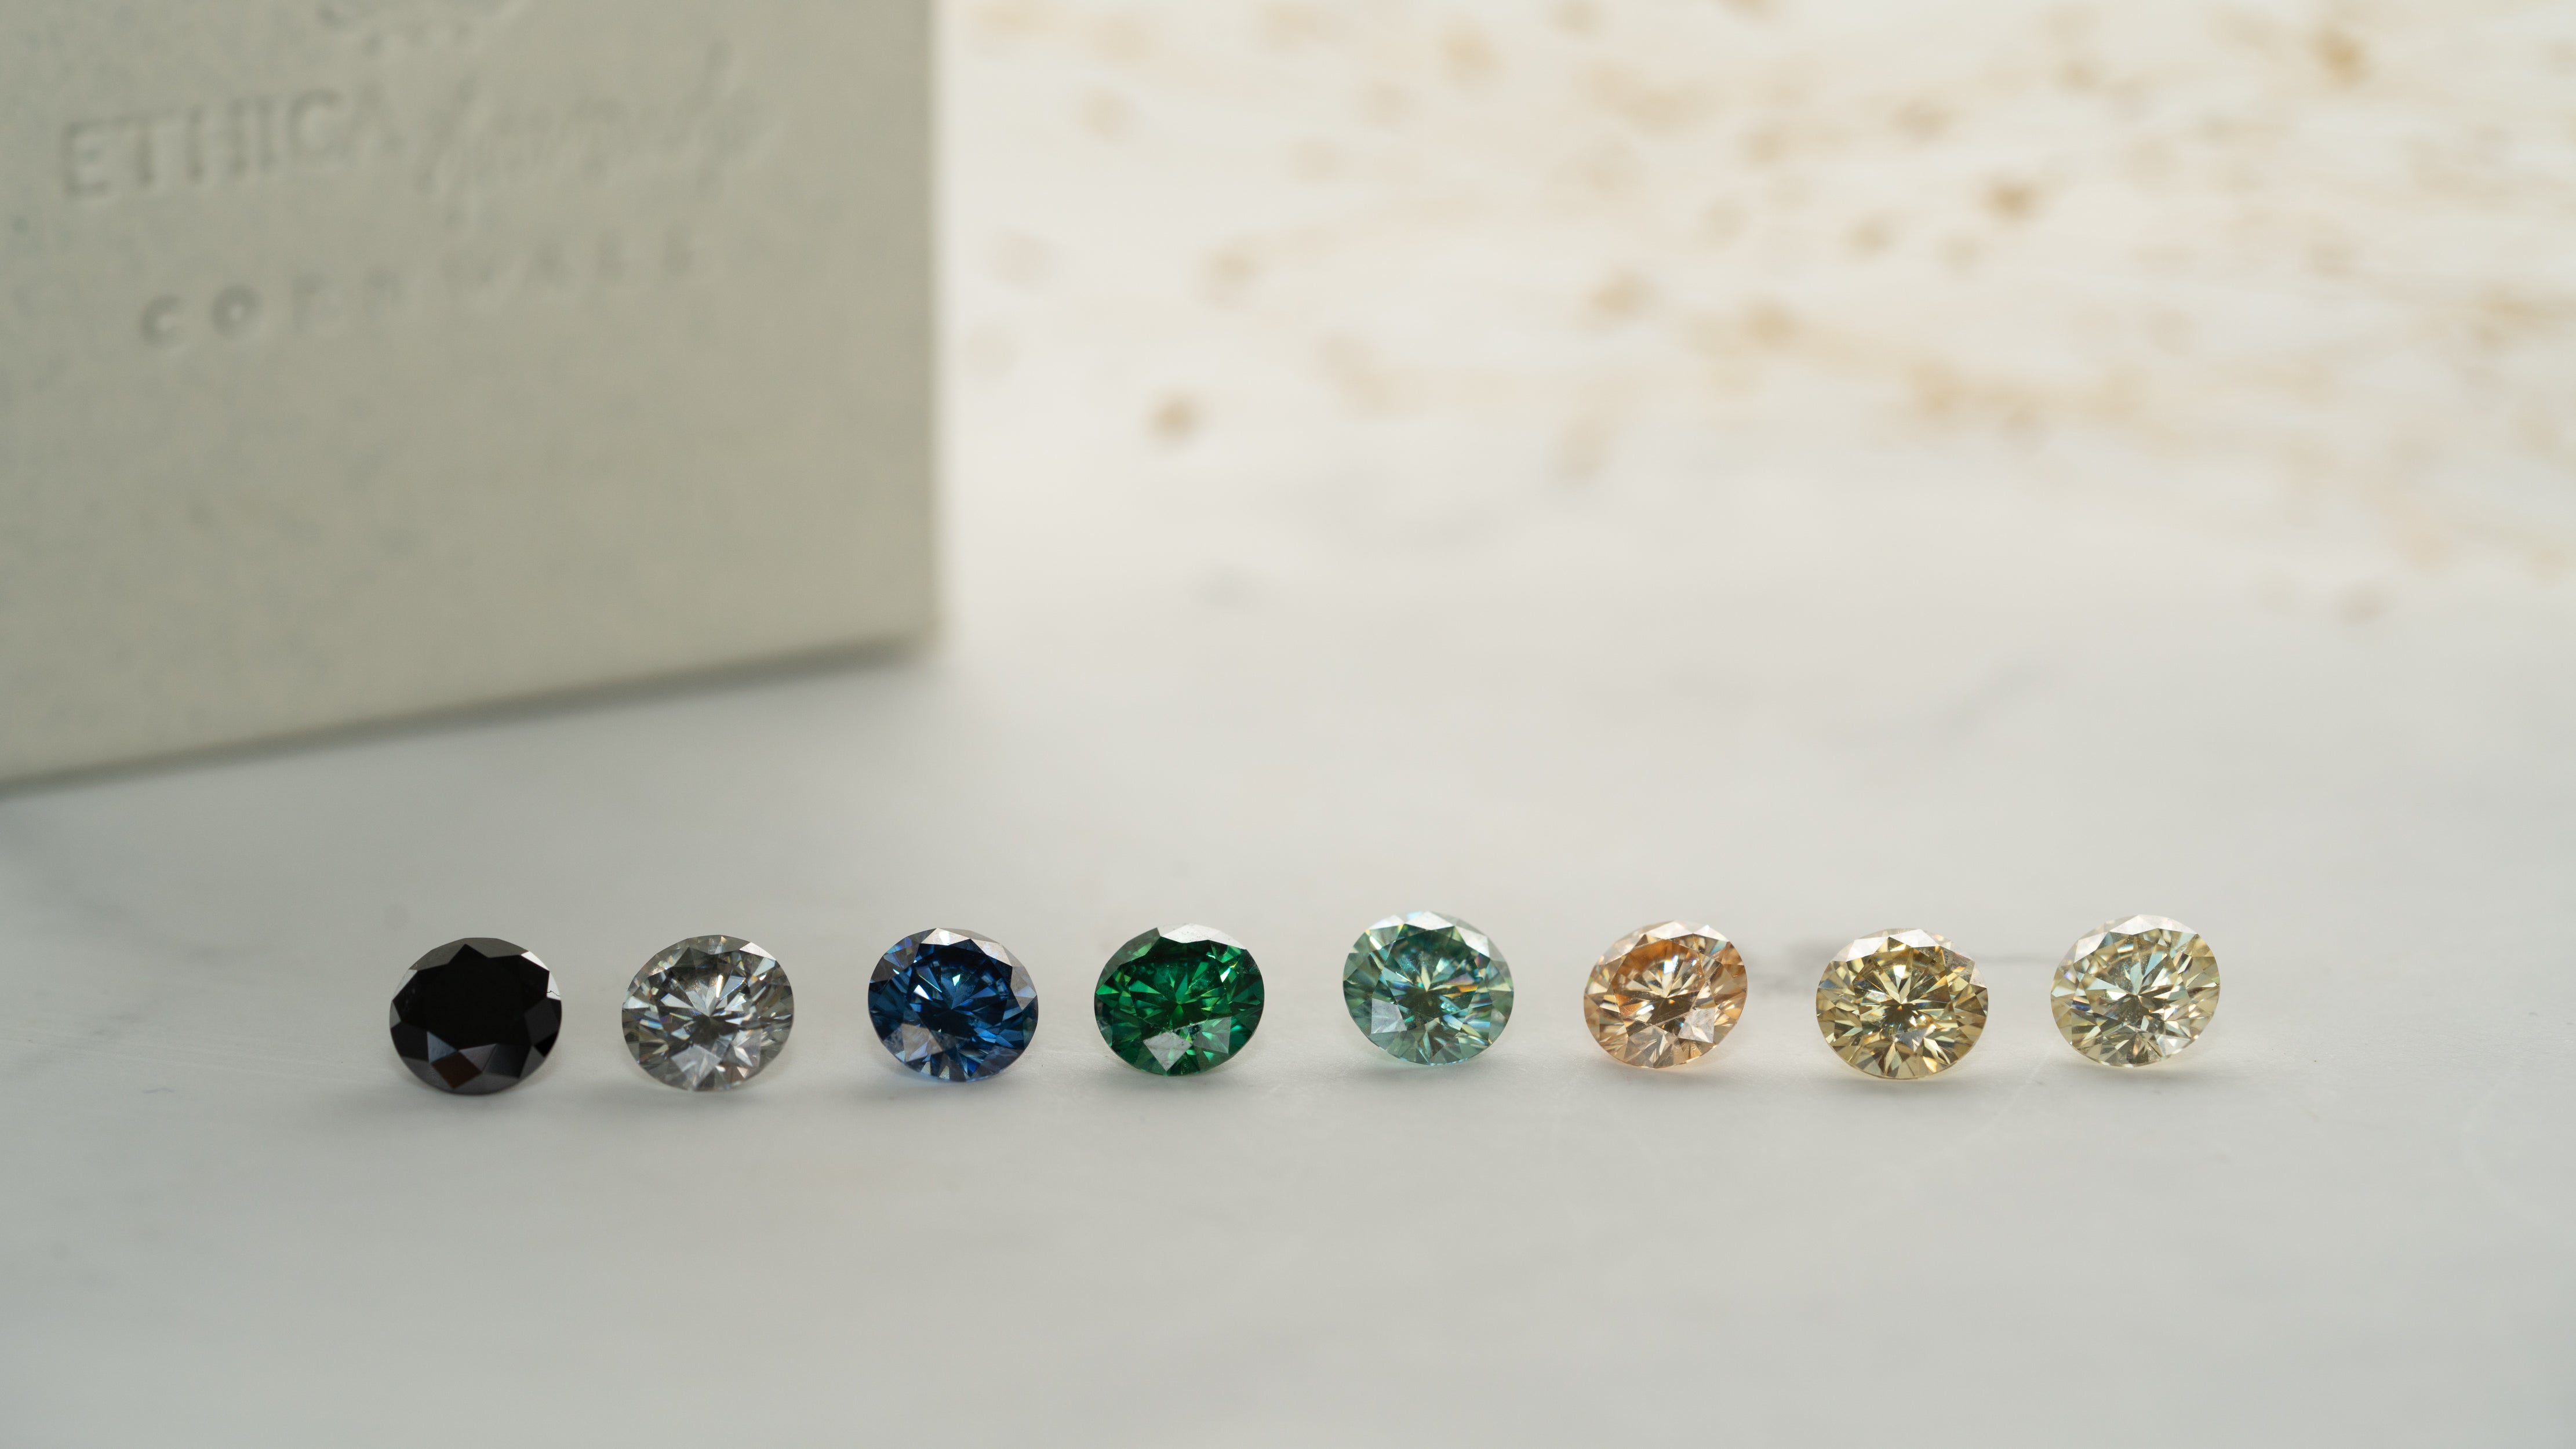 Eight Ethica Diamond moissanite loose stones in eight different colours are photographed in a line on a soft white background, with ring box and dried leaves in the background.